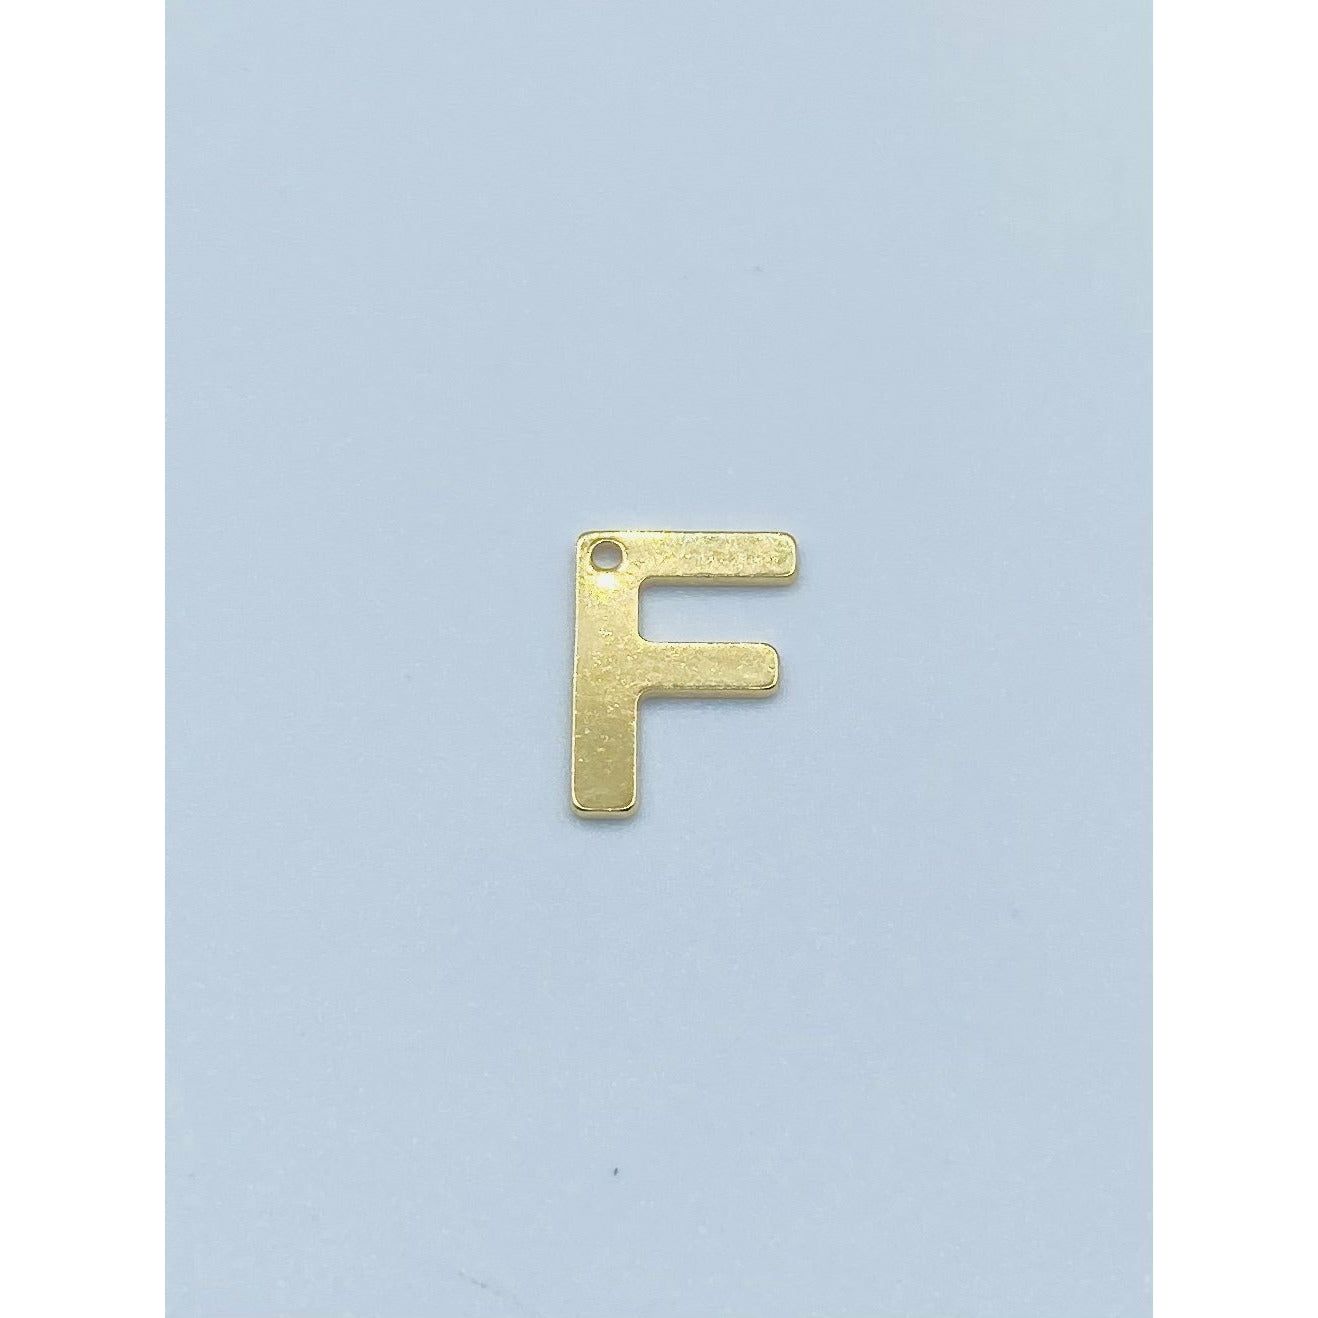 EXPRESS YOURSELF A-H BLOCK LETTER EARRING CHARM